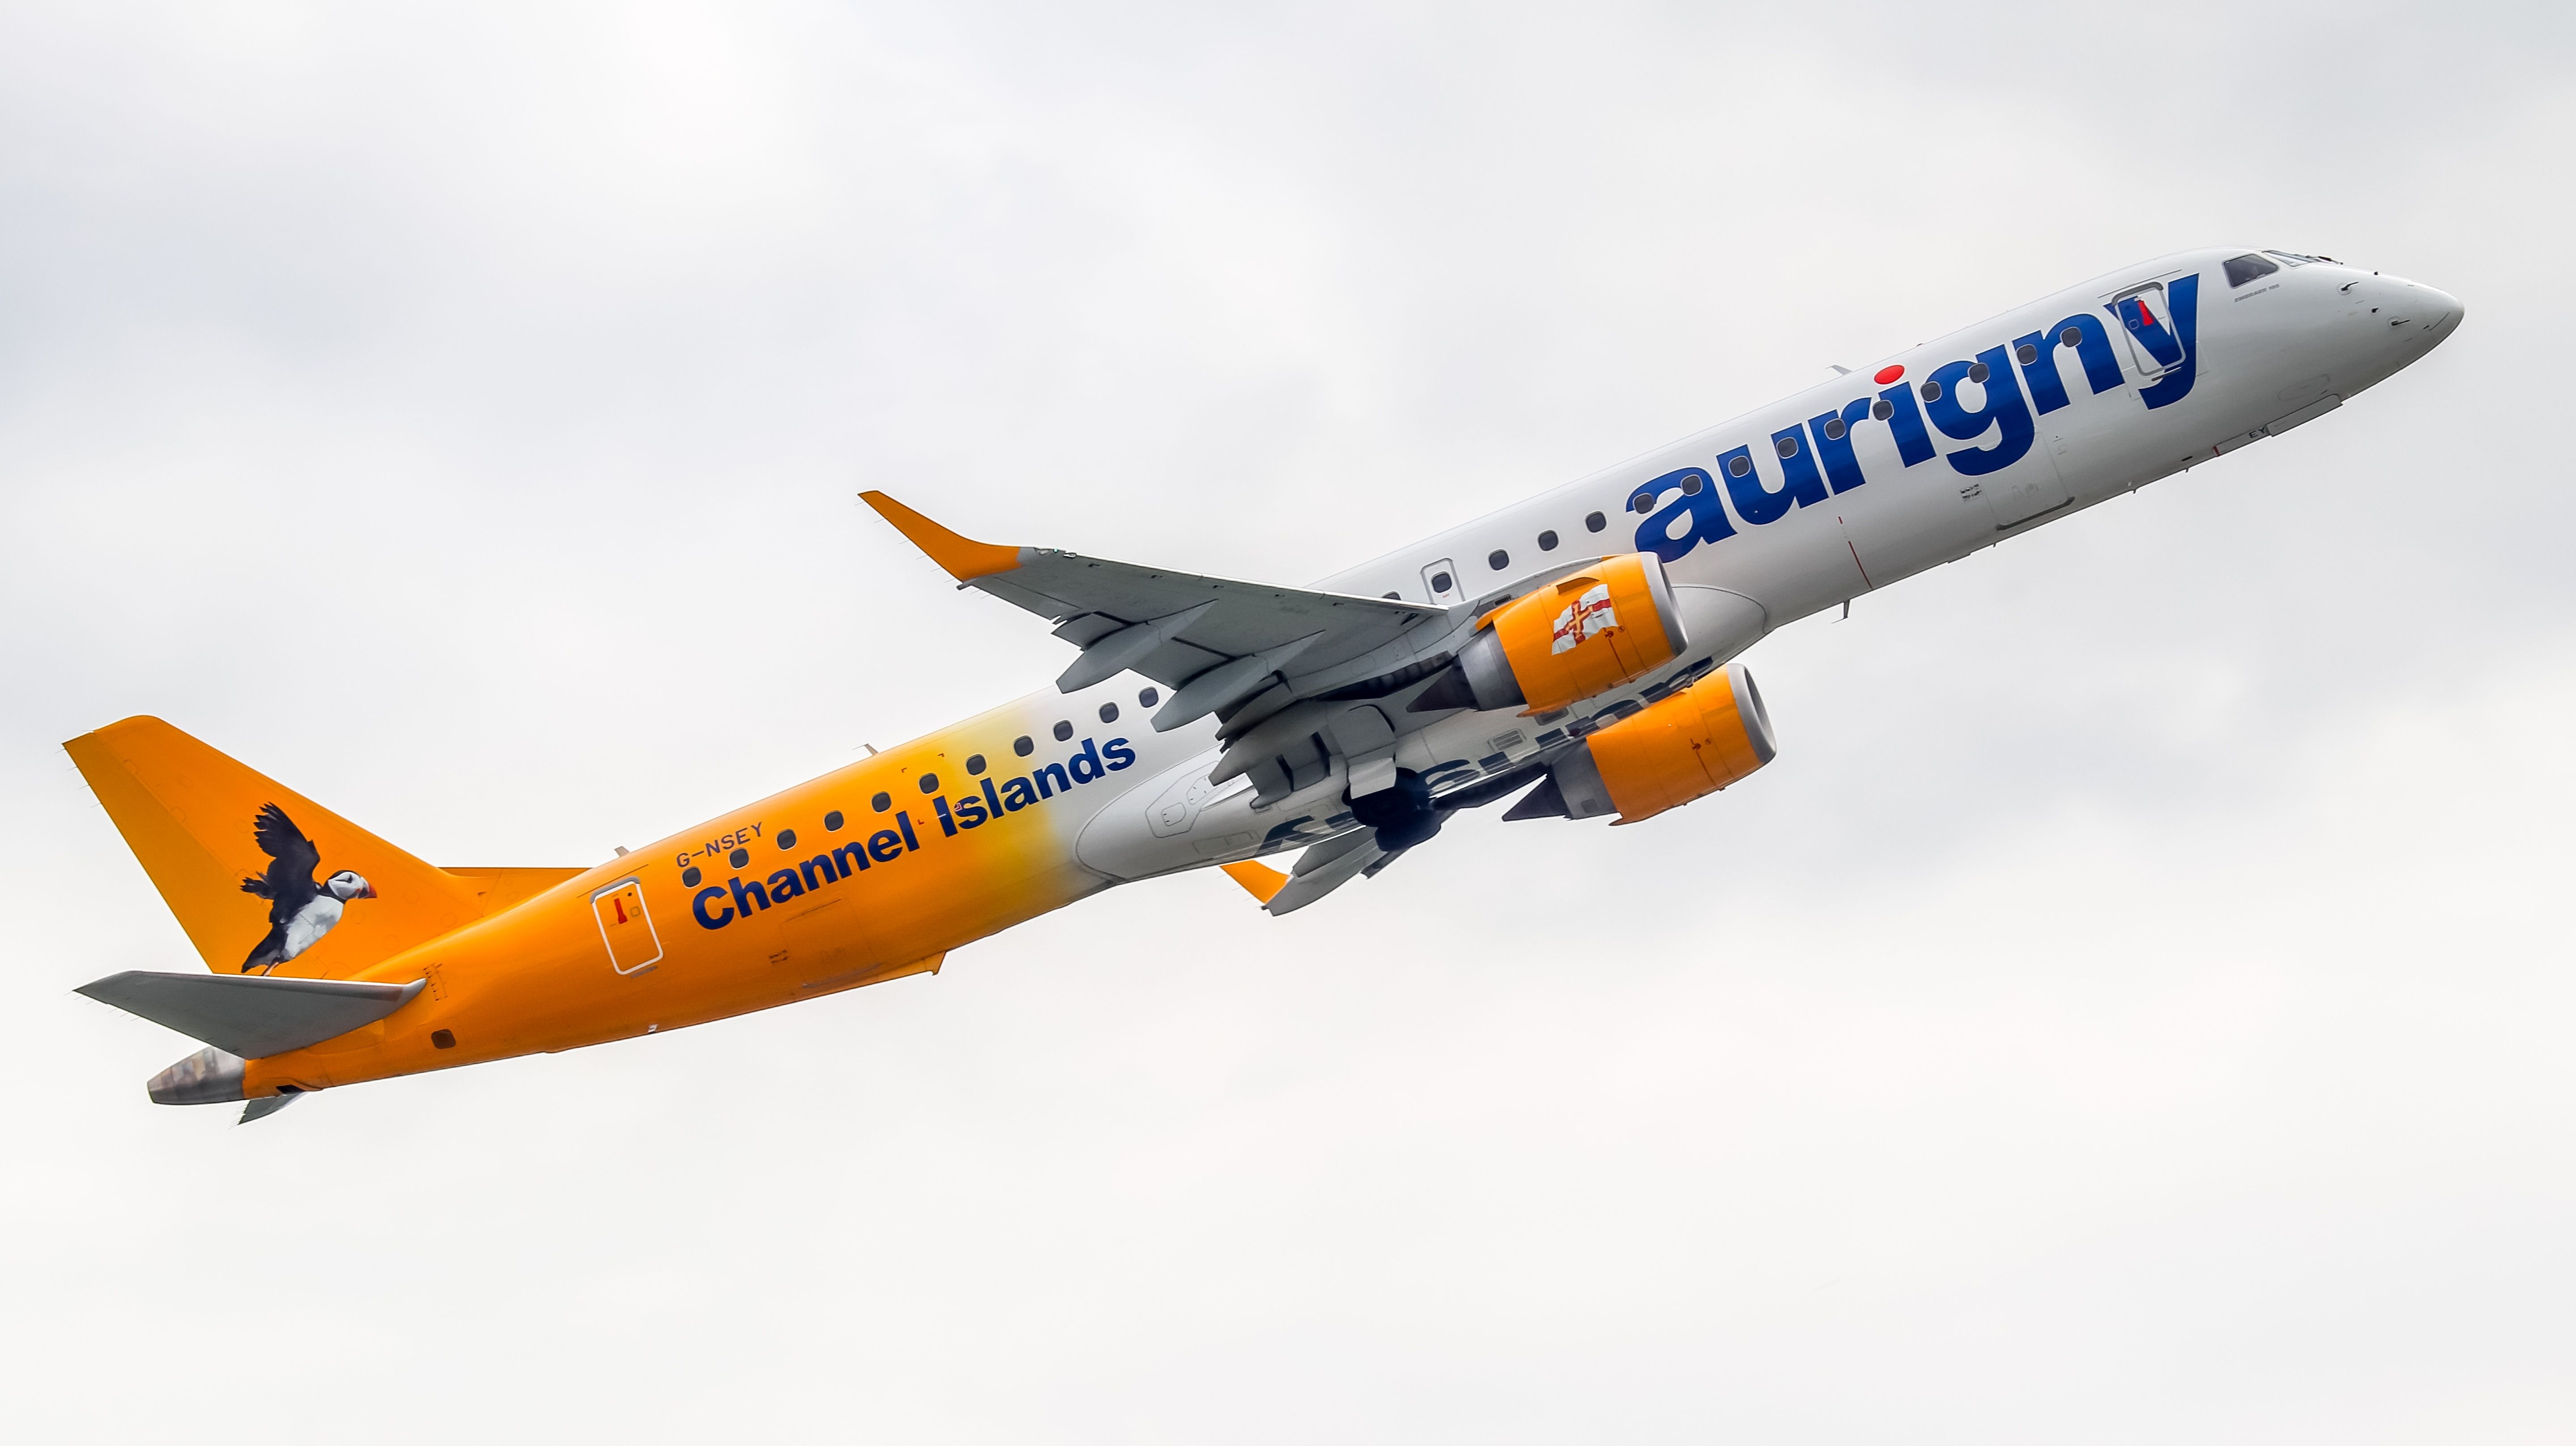 Aurigny Embraer E195 Departing From Manchester Airport